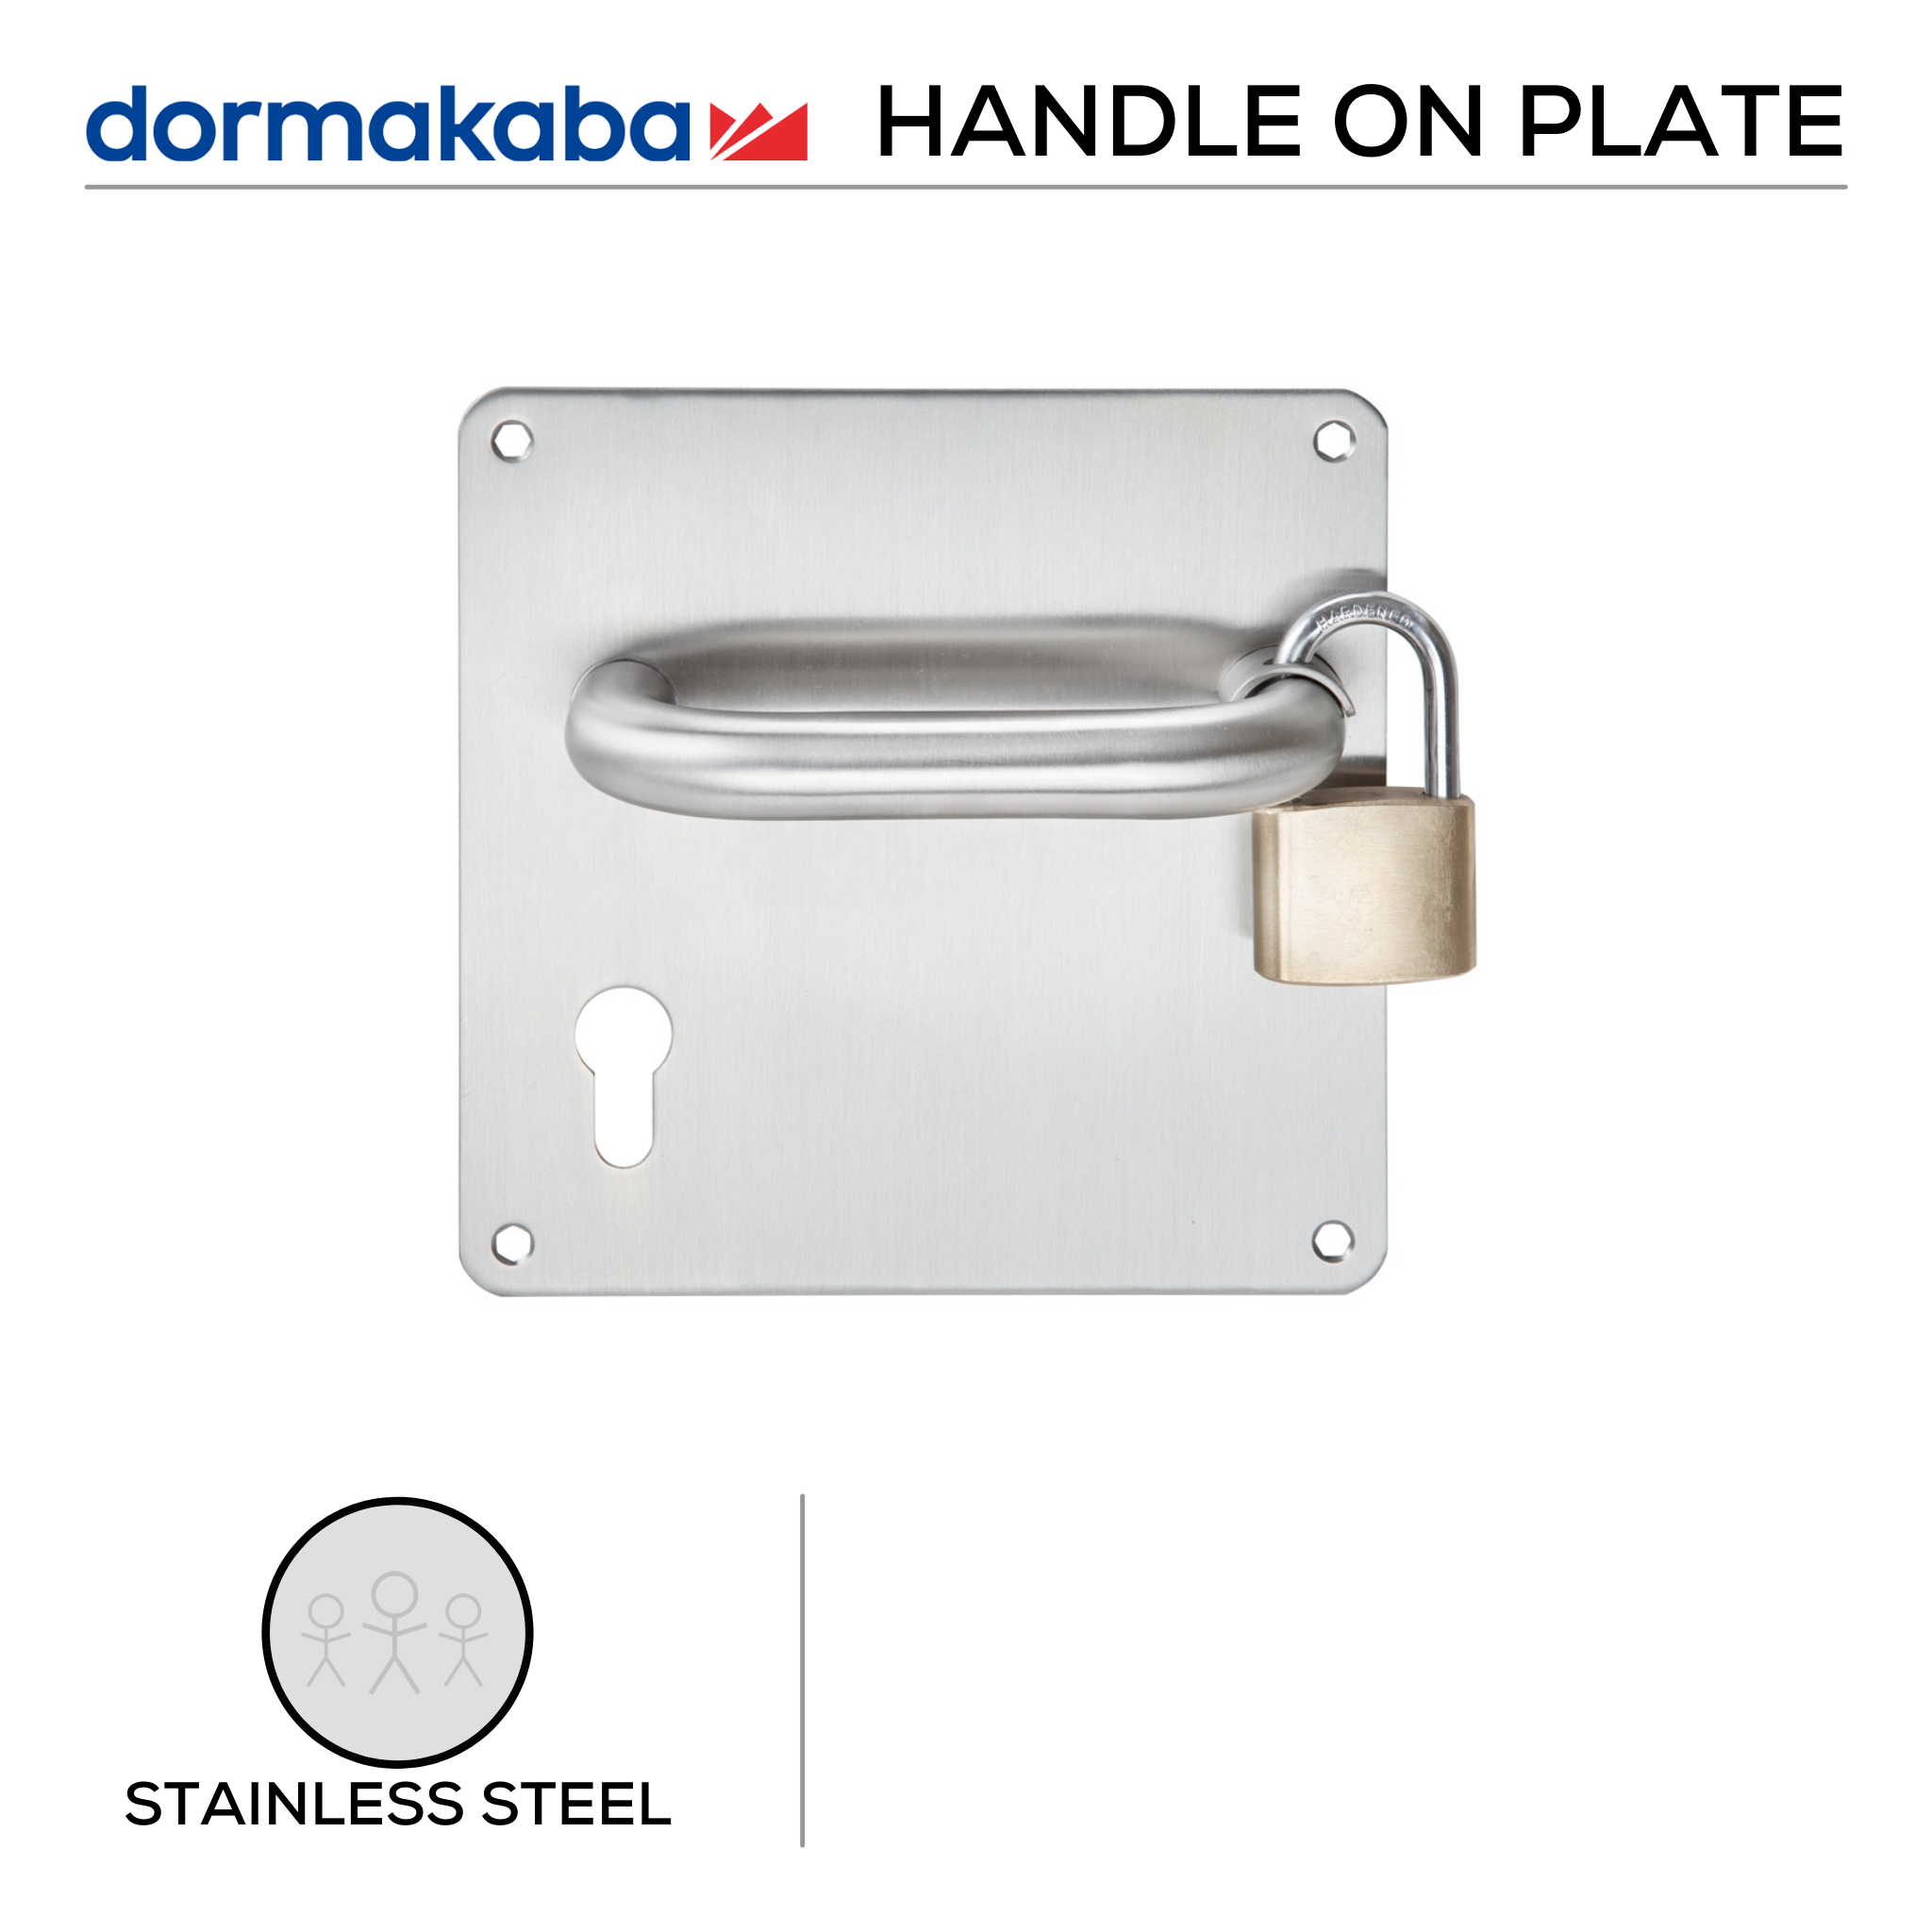 TH 120/RES LH, Lever Handles, Tubular, On 170 x 170mm Back Plate, With Cylinder Escutcheons, 170mm (l), Stainless Steel, DORMAKABA